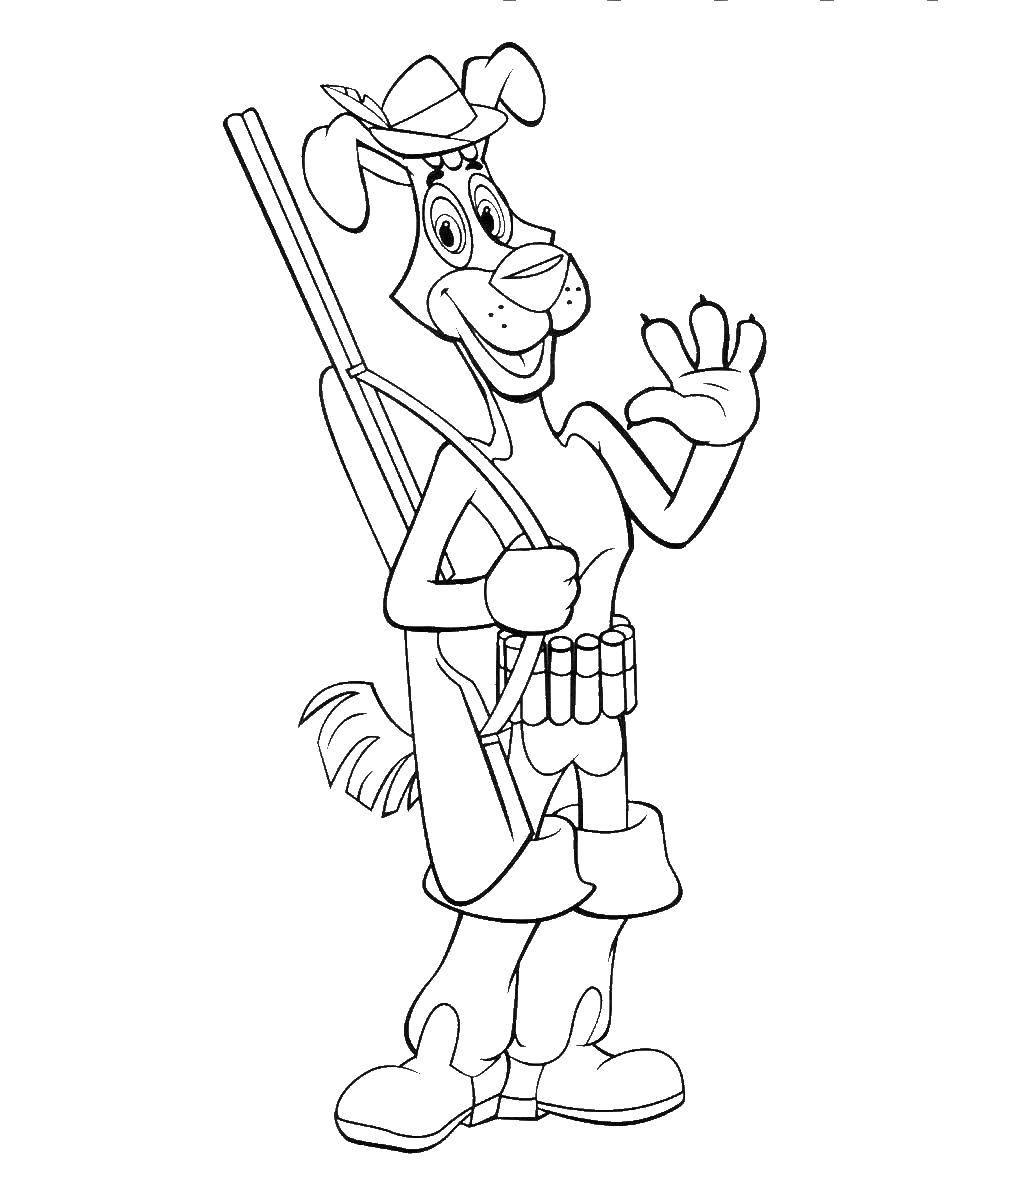 Coloring A ball with a gun. Category coloring, buttermilk. Tags:  Cartoon character, Buttermilk .